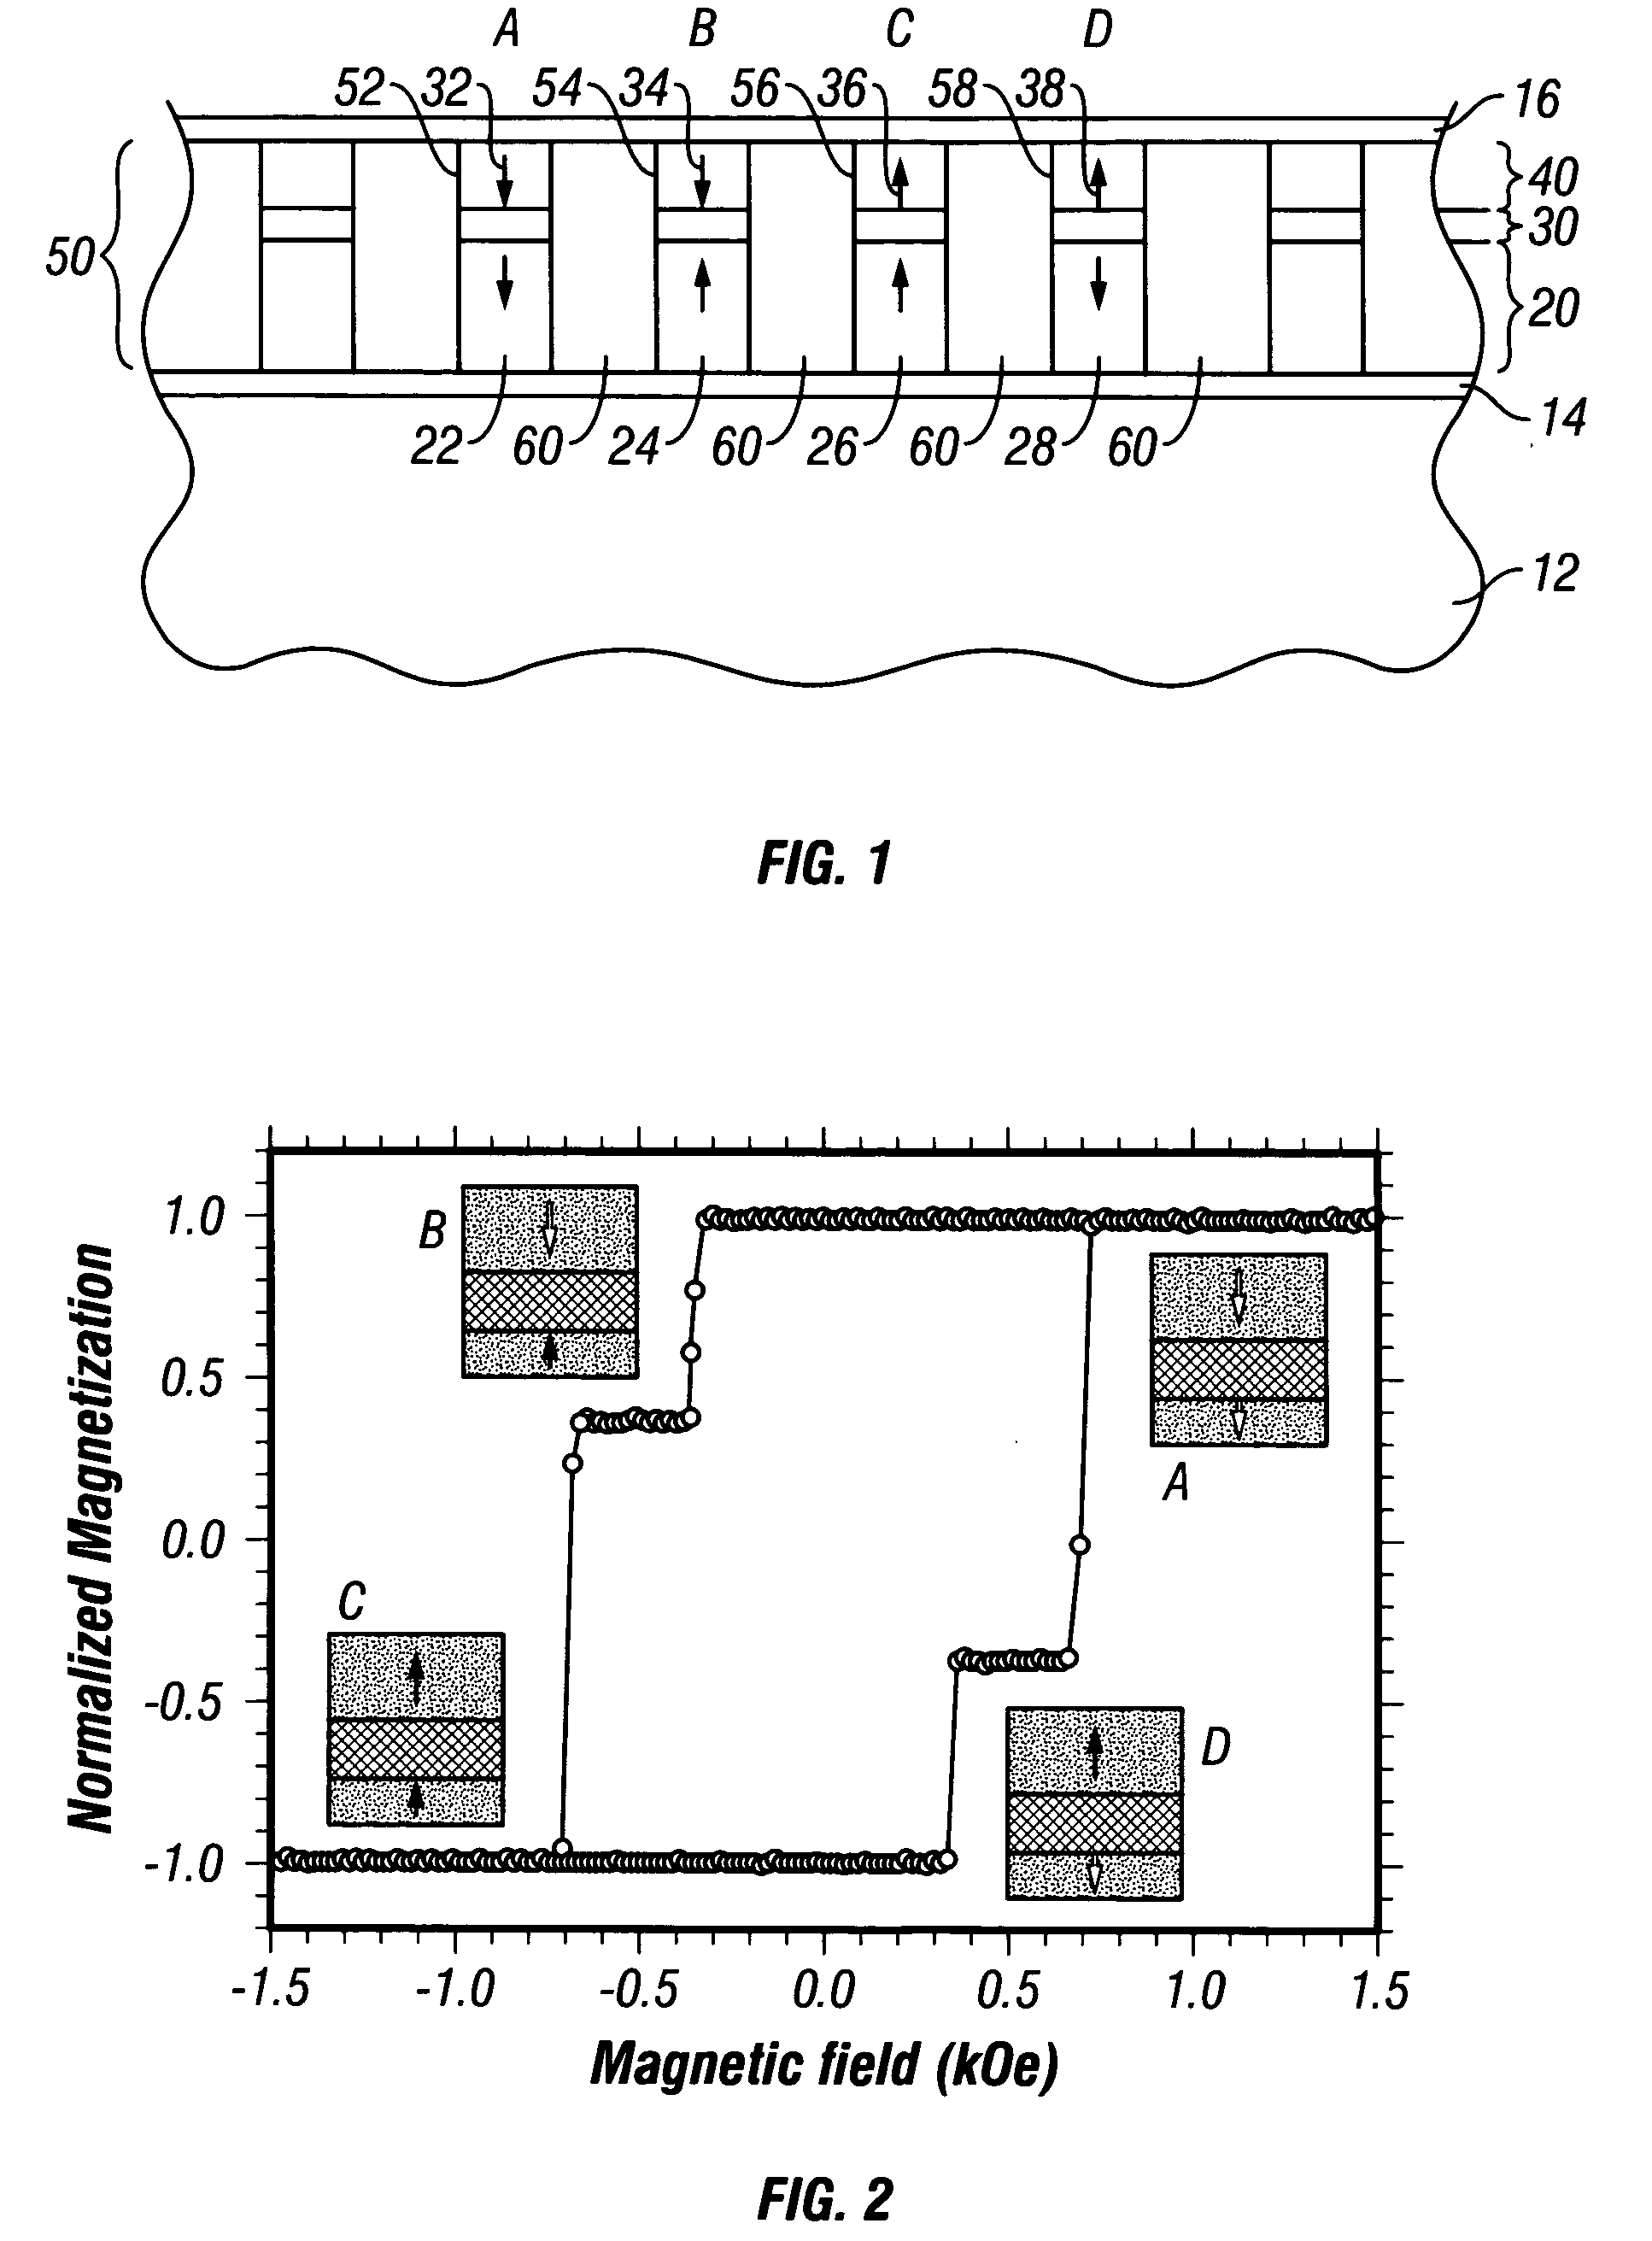 Magnetic recording system with patterned multilevel perpendicular magnetic recording